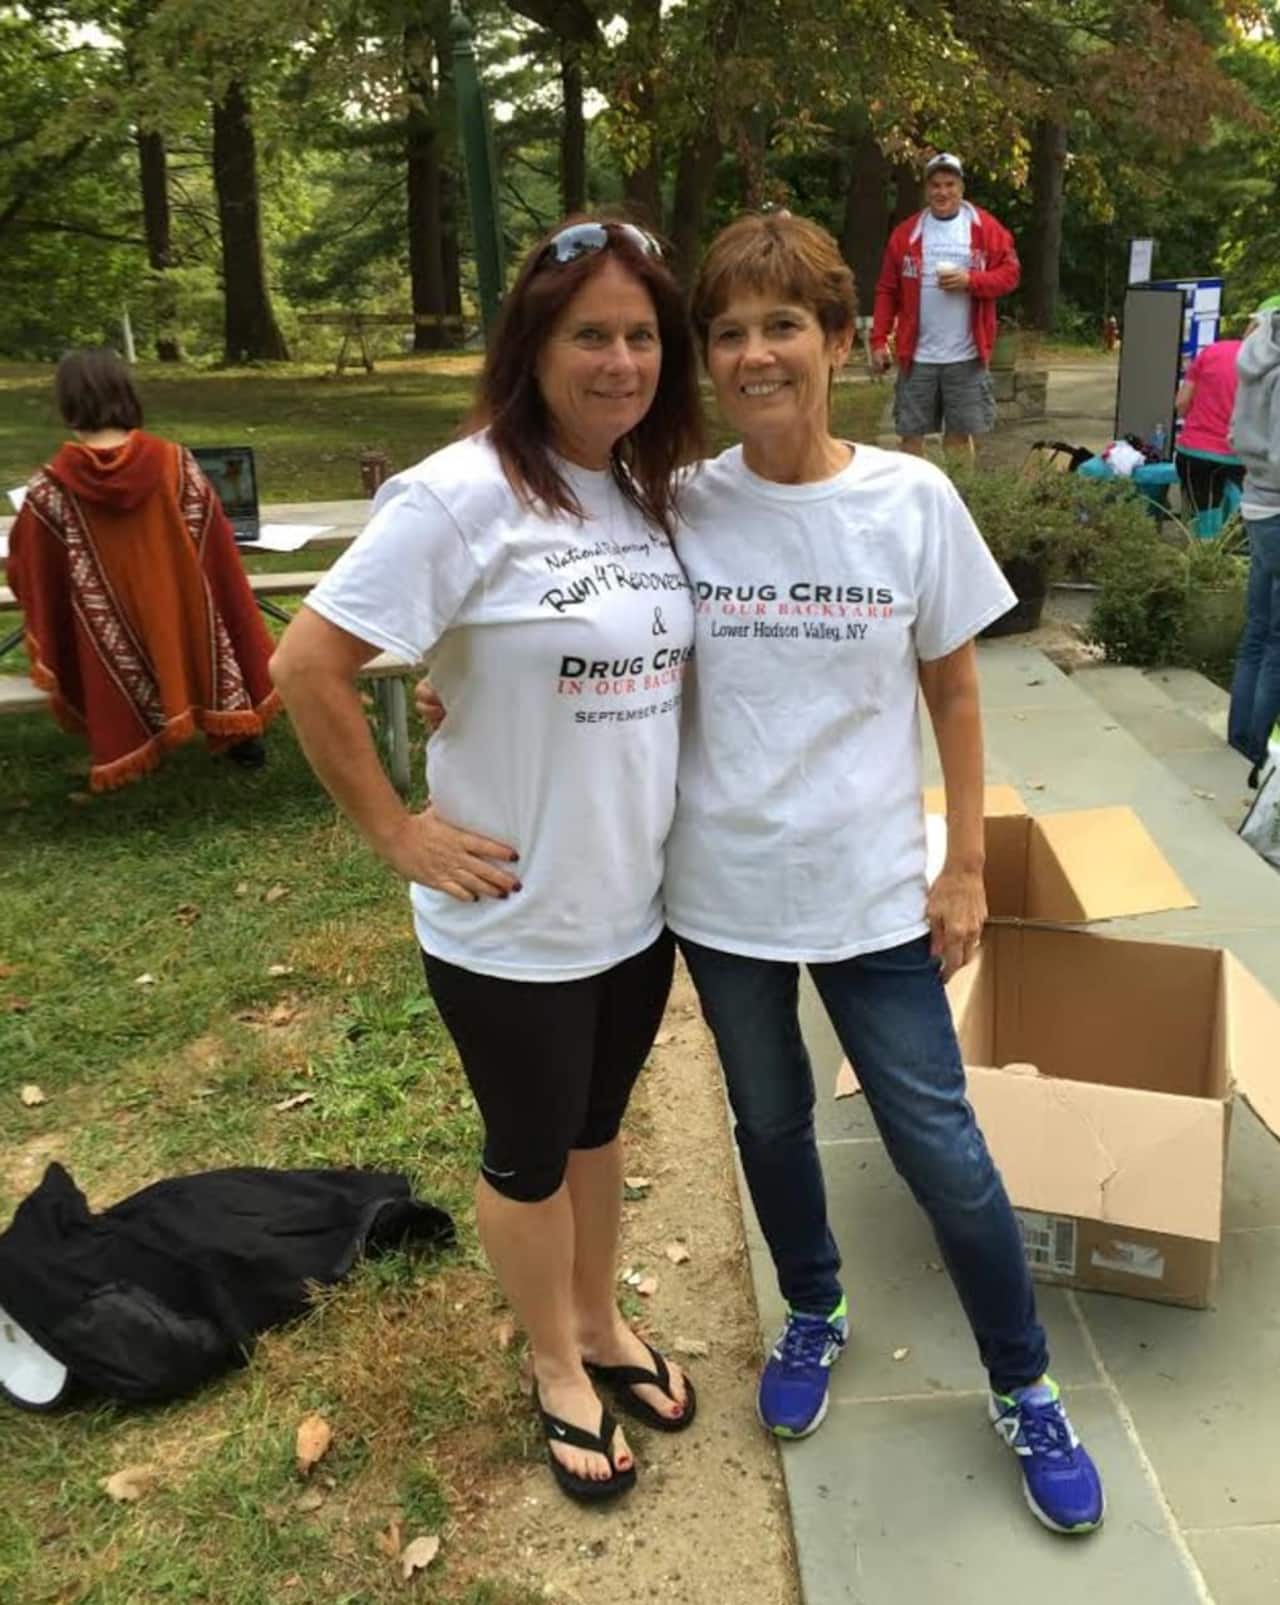 Victoria Meitz, founder of Run4Recovery and Susan Salomone, founder of Drug Crisis in our Backyard at last year’s Run4Recovery fundraiser.